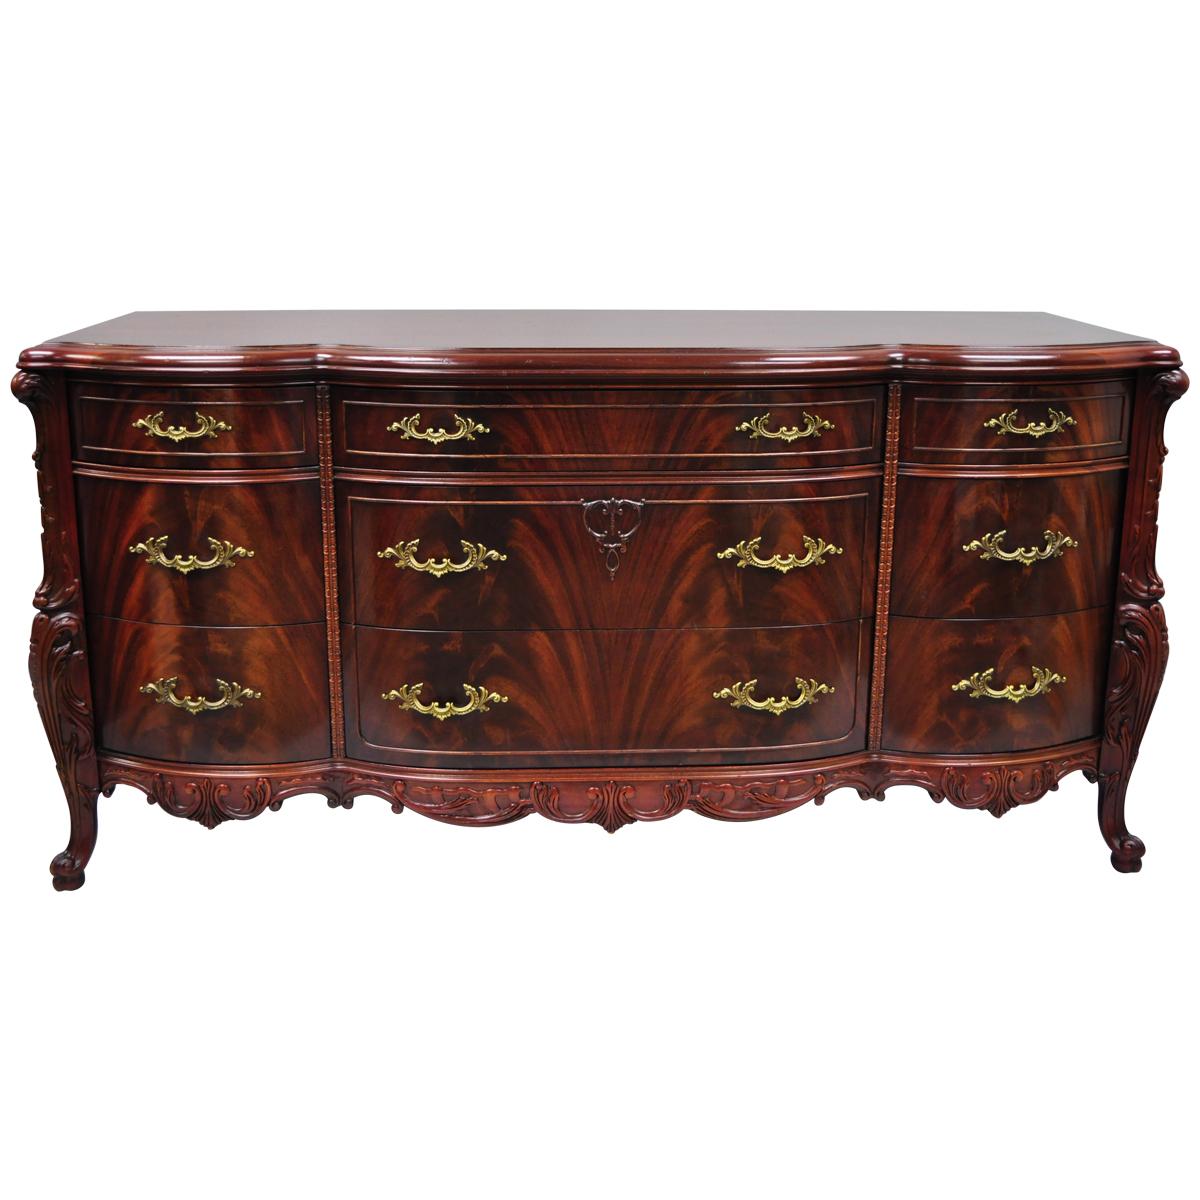 Antique Flame Mahogany Long Triple Dresser Serpentine Carved "Swan" French Style